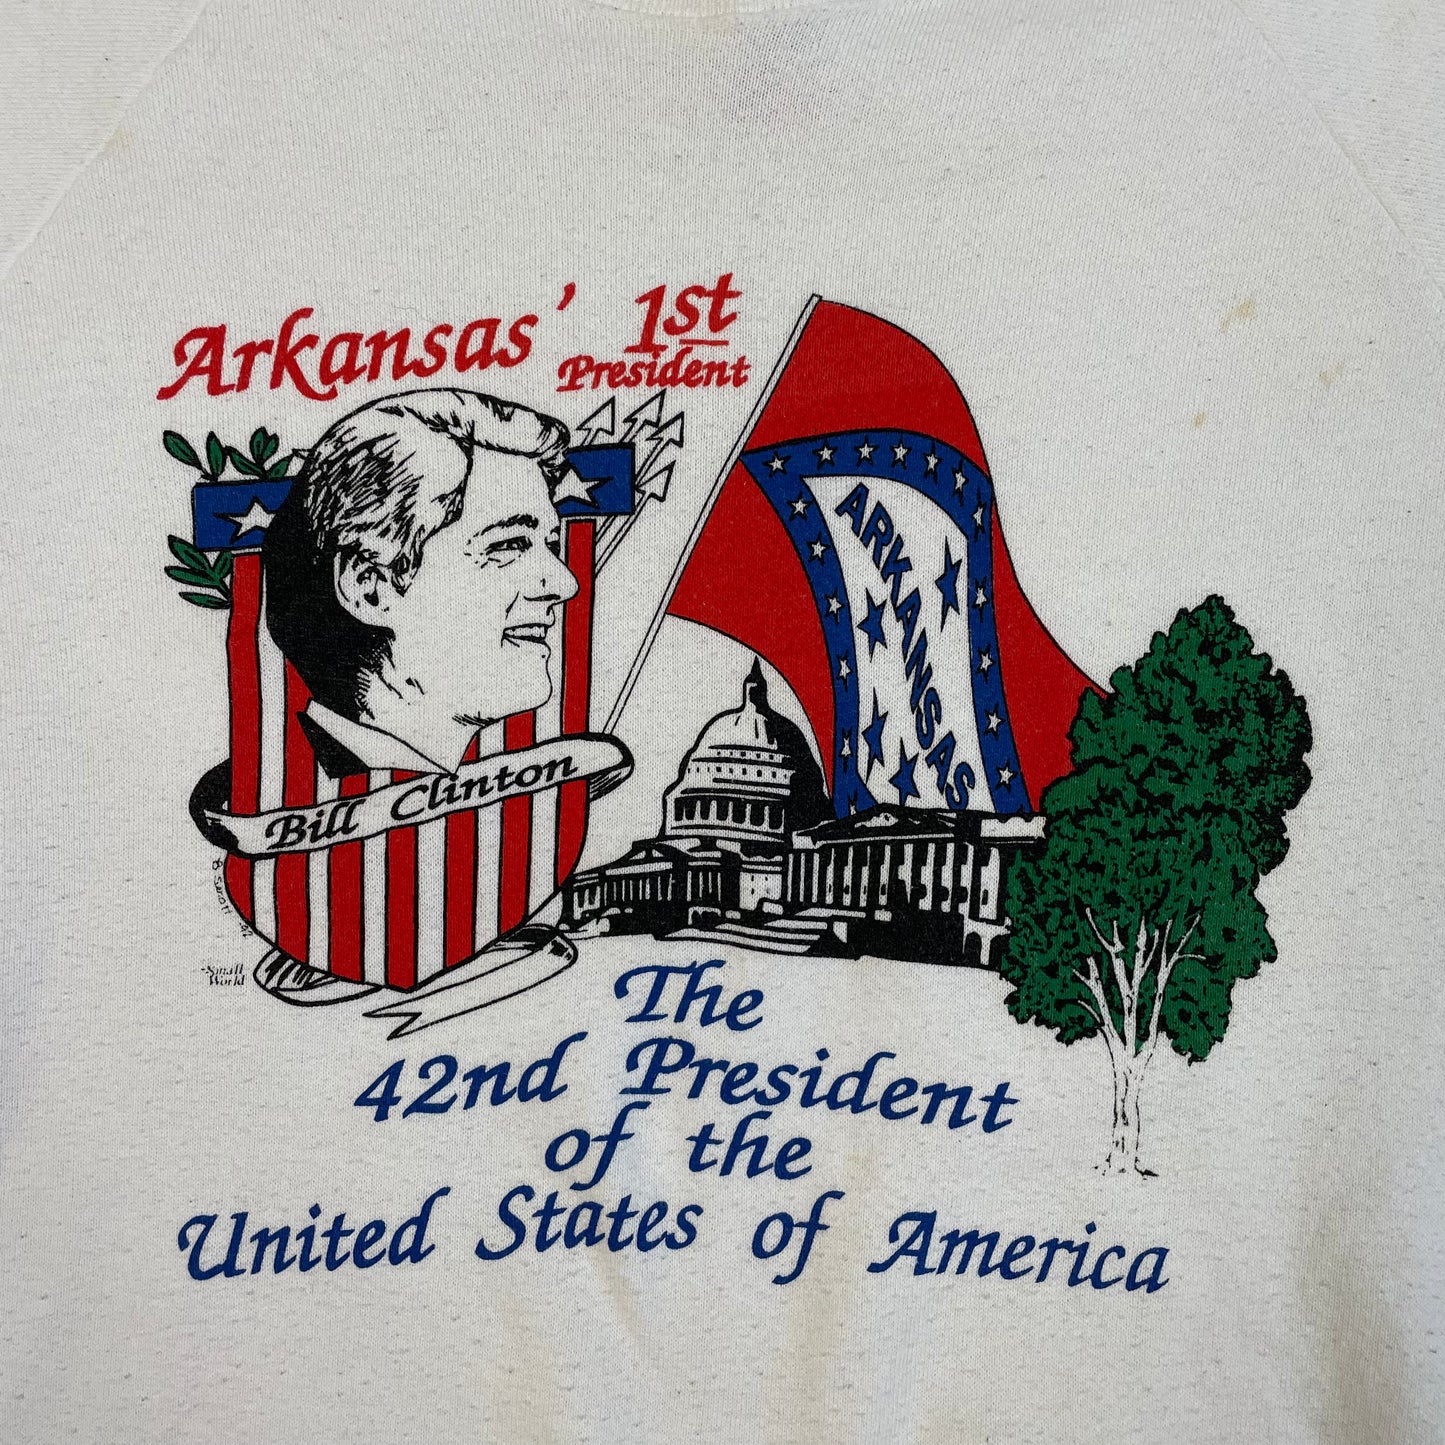 Vintage Sweater Fruit of the Loom Bill Clinton “Arkansas’ 1st President” “The 42nd President of the United States of America” Made in USA 90’s